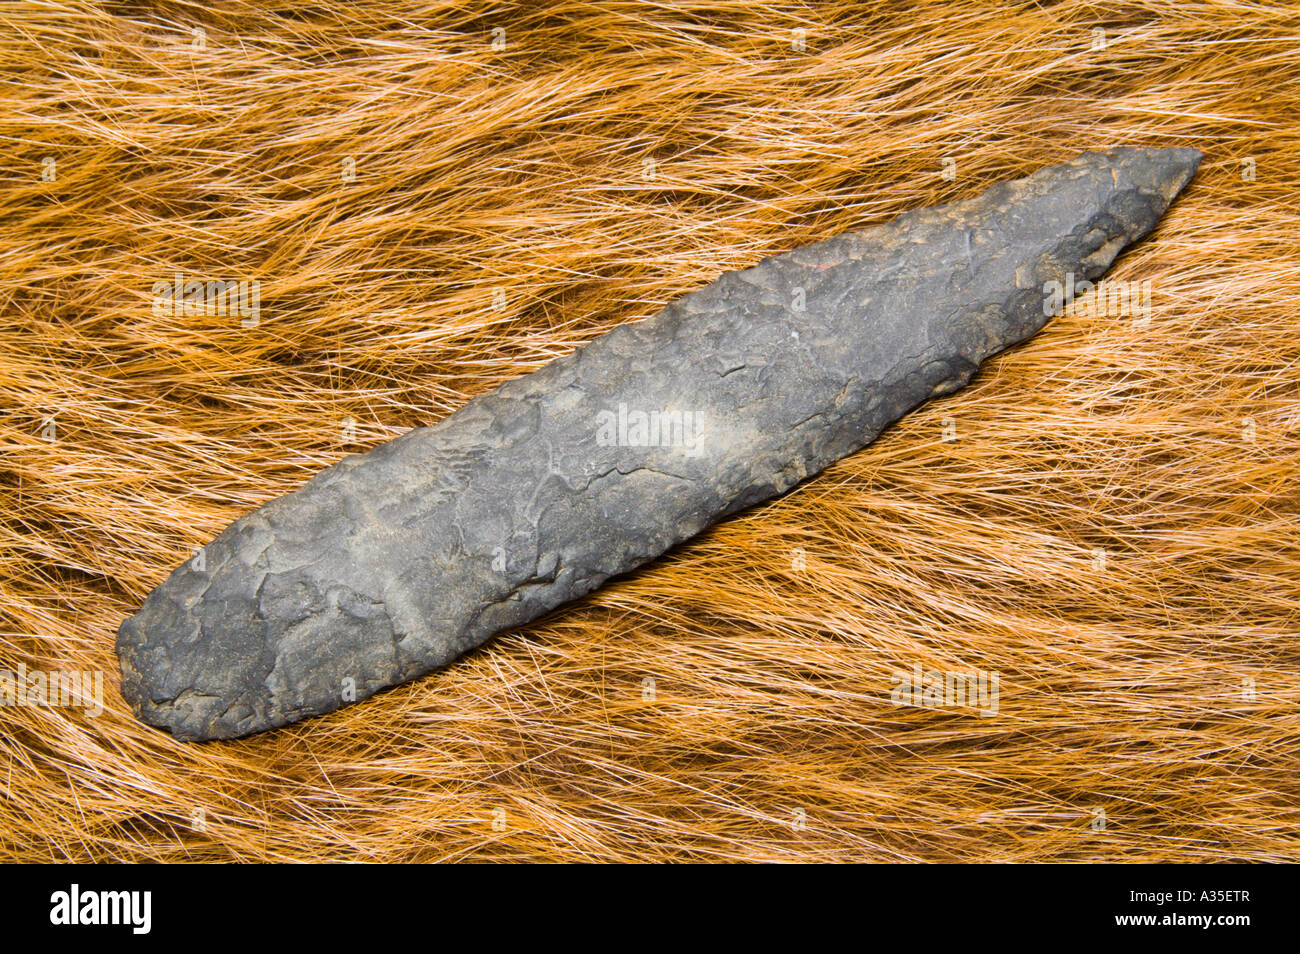 pacific northwest native american stone spear point Stock Photo